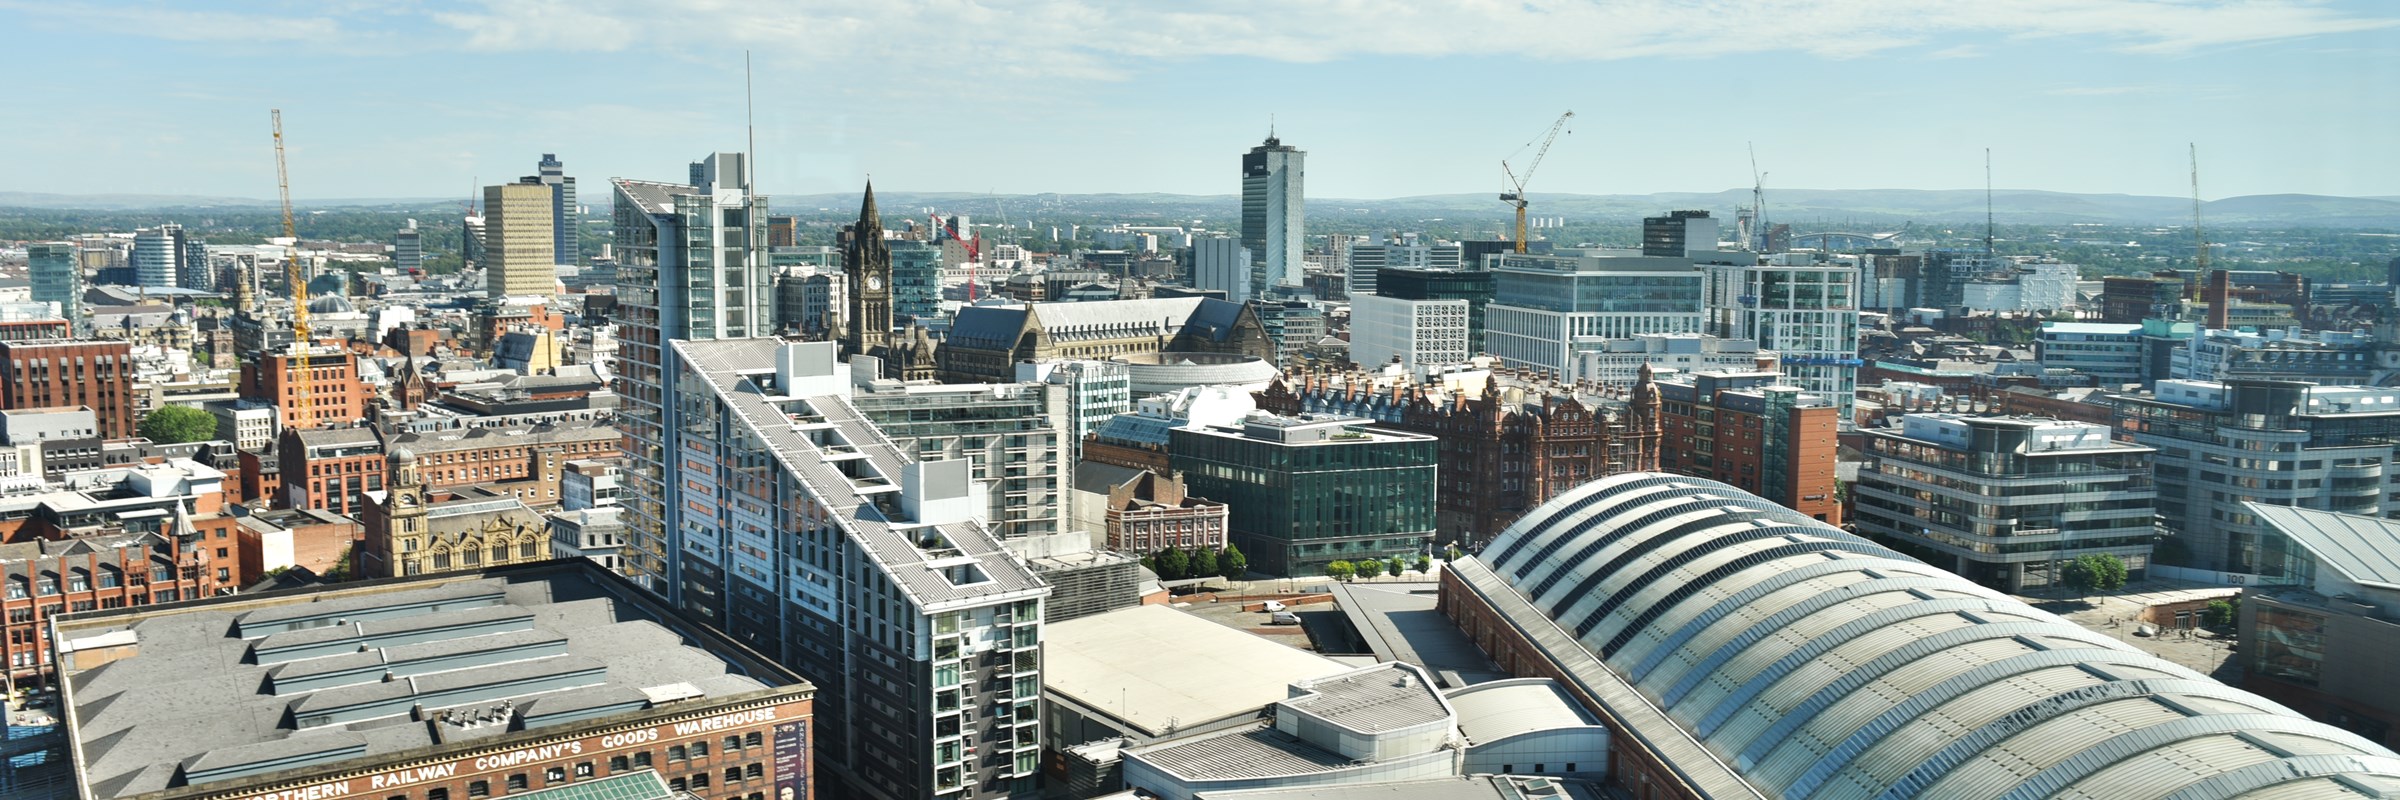 Aerial view of Manchester